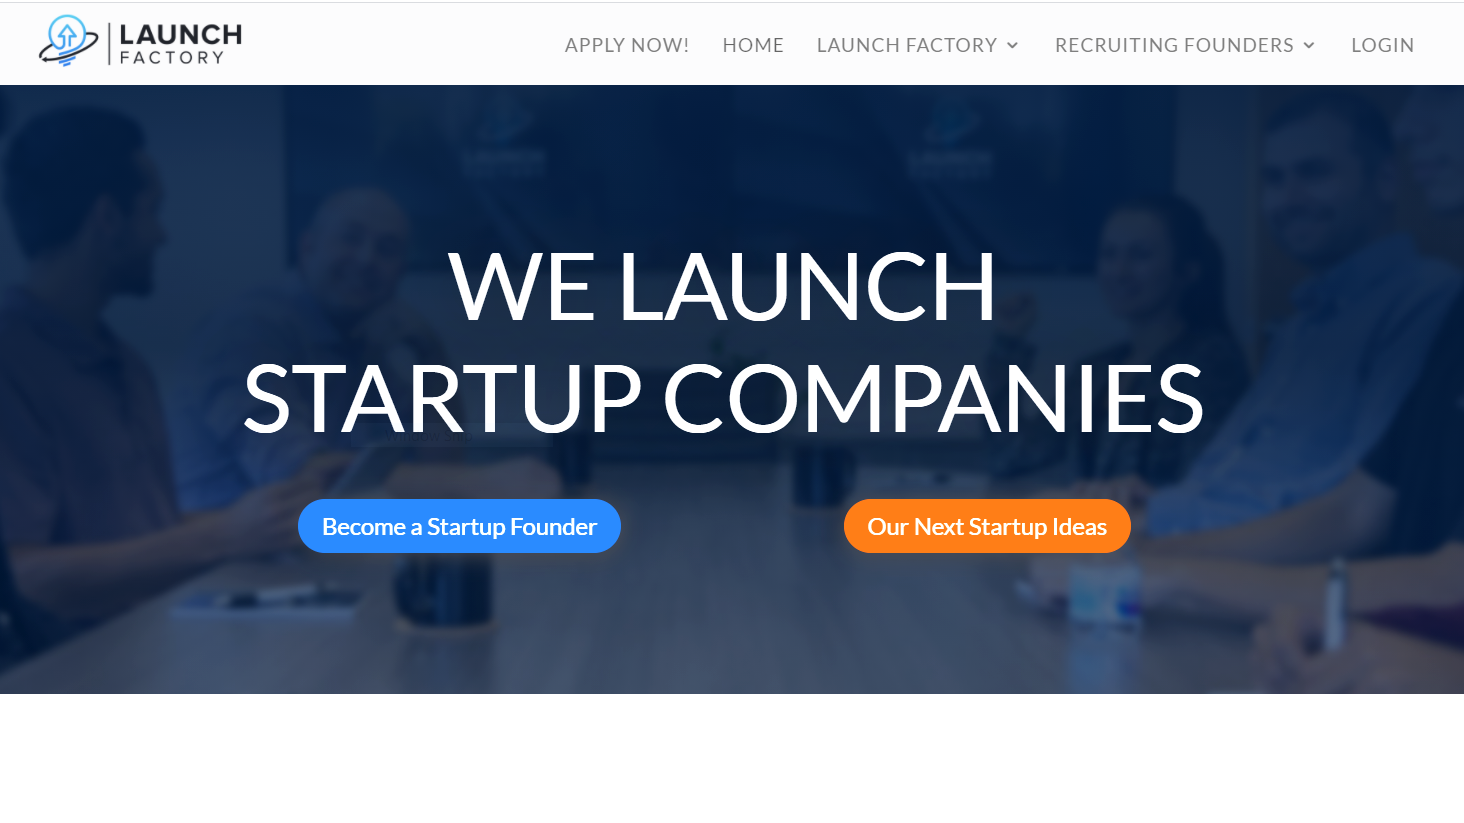 On LawNext: LaunchFactory Has Legal Tech Ideas, Seeks Founders To Run With Them